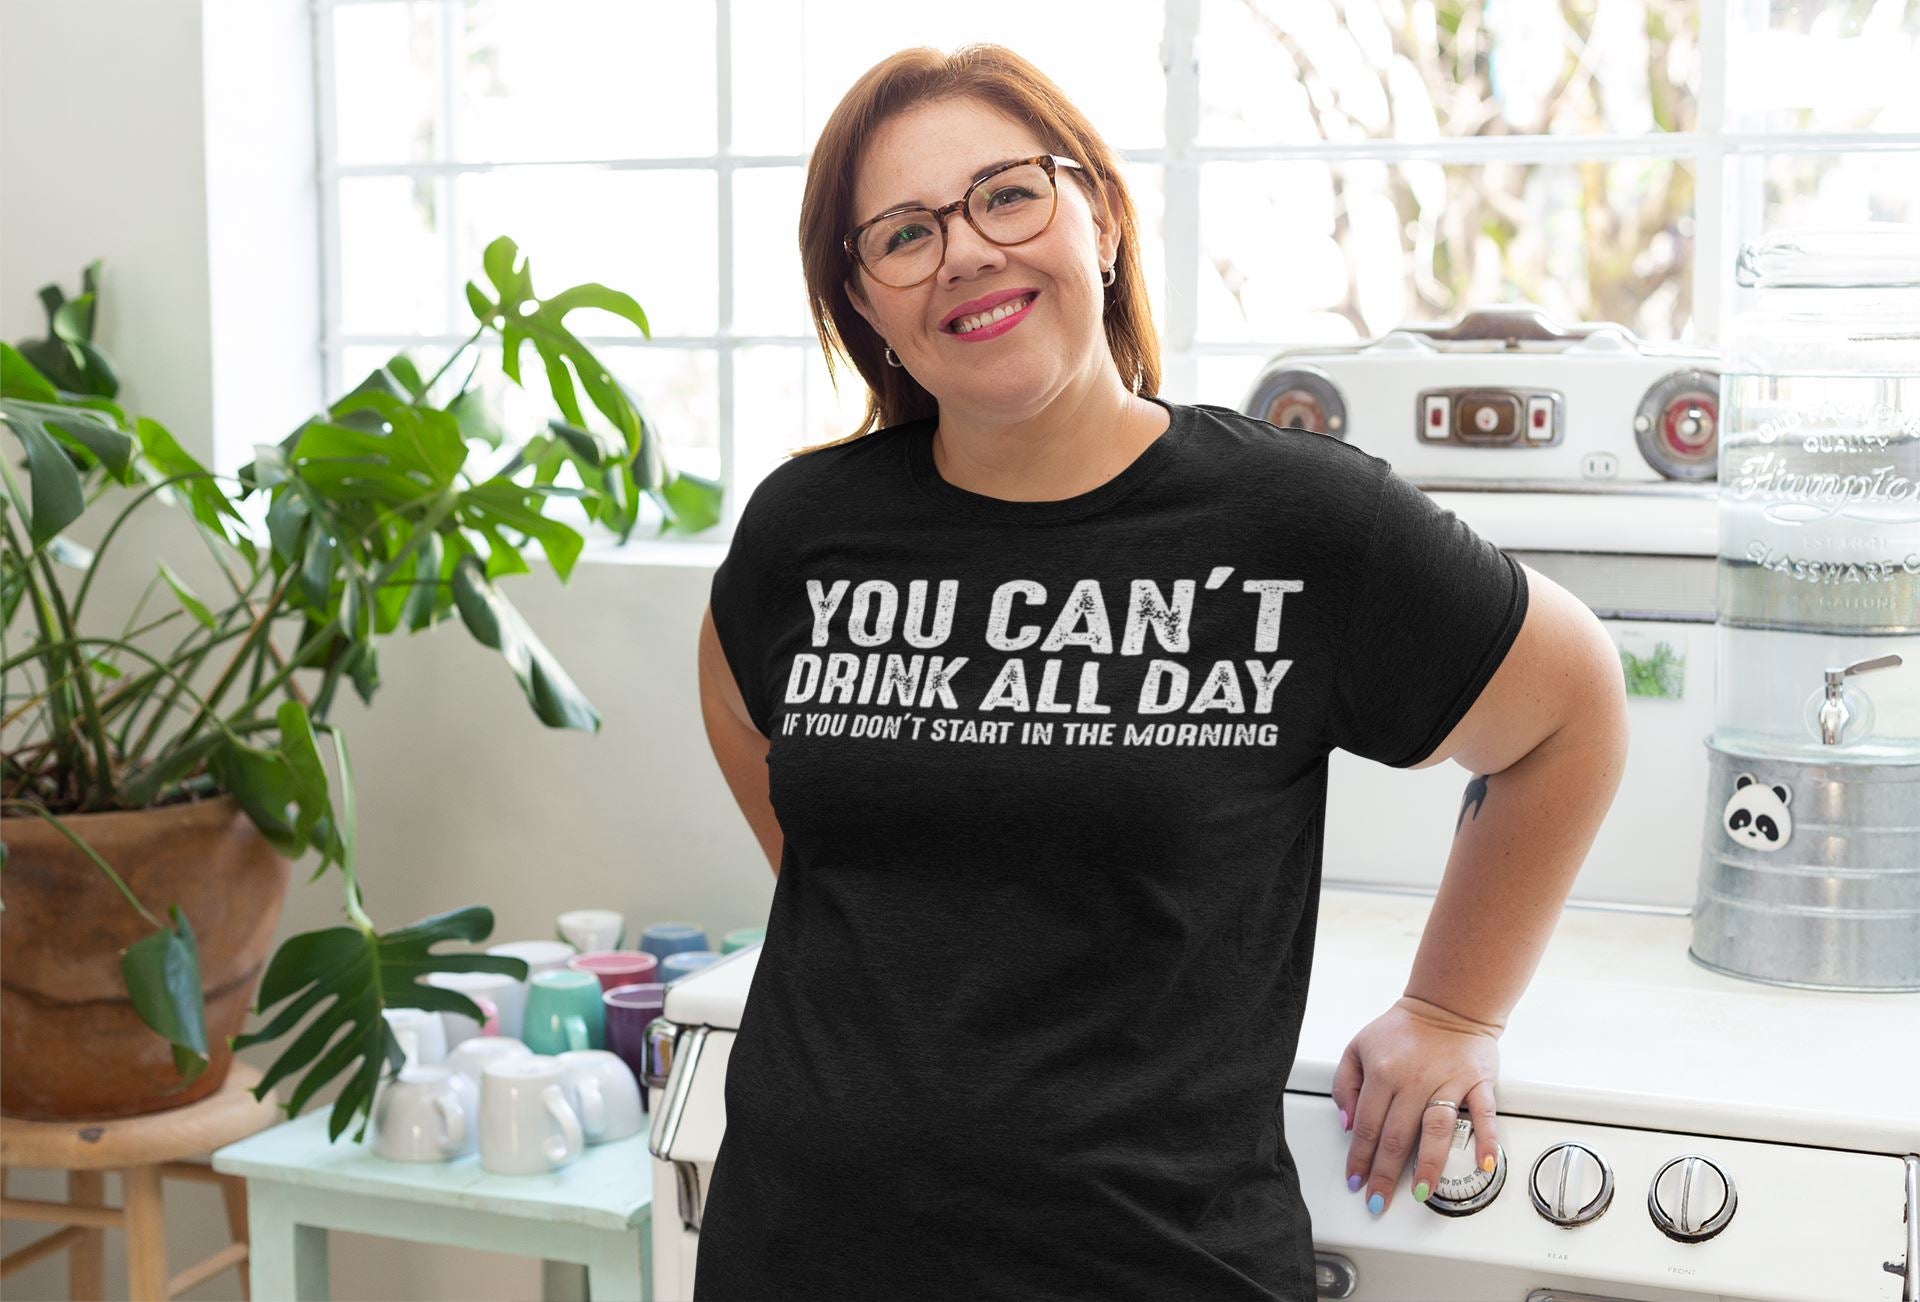 You Can't Drink All Day If You Don't Start in the Morning Funny Black T Shirt for Men and Women freeshipping - Catch My Drift India